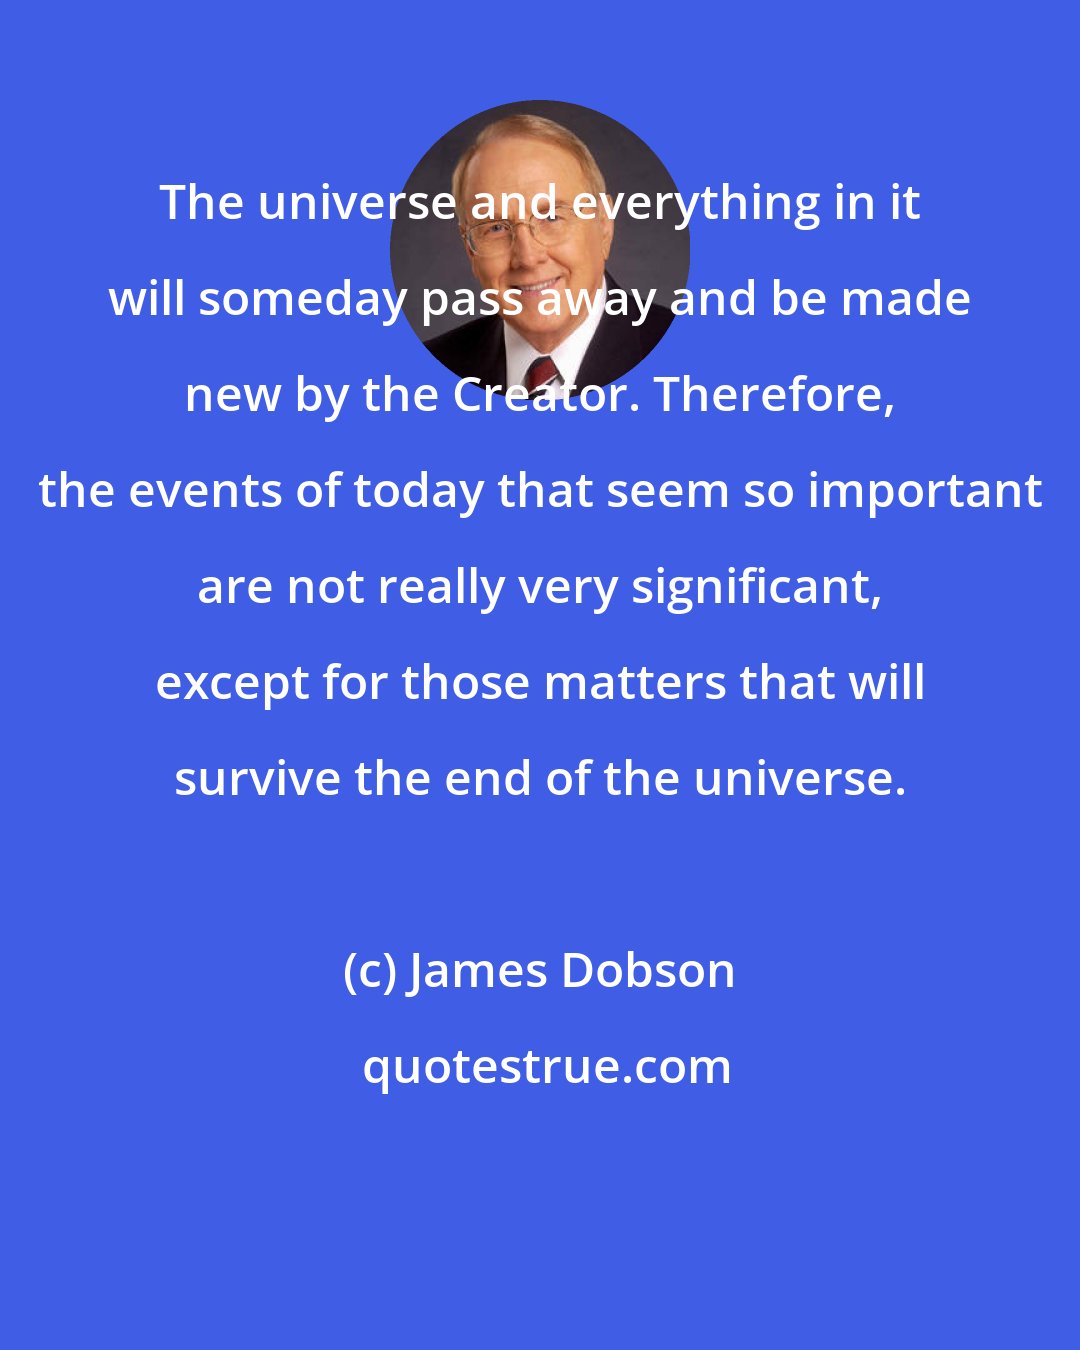 James Dobson: The universe and everything in it will someday pass away and be made new by the Creator. Therefore, the events of today that seem so important are not really very significant, except for those matters that will survive the end of the universe.